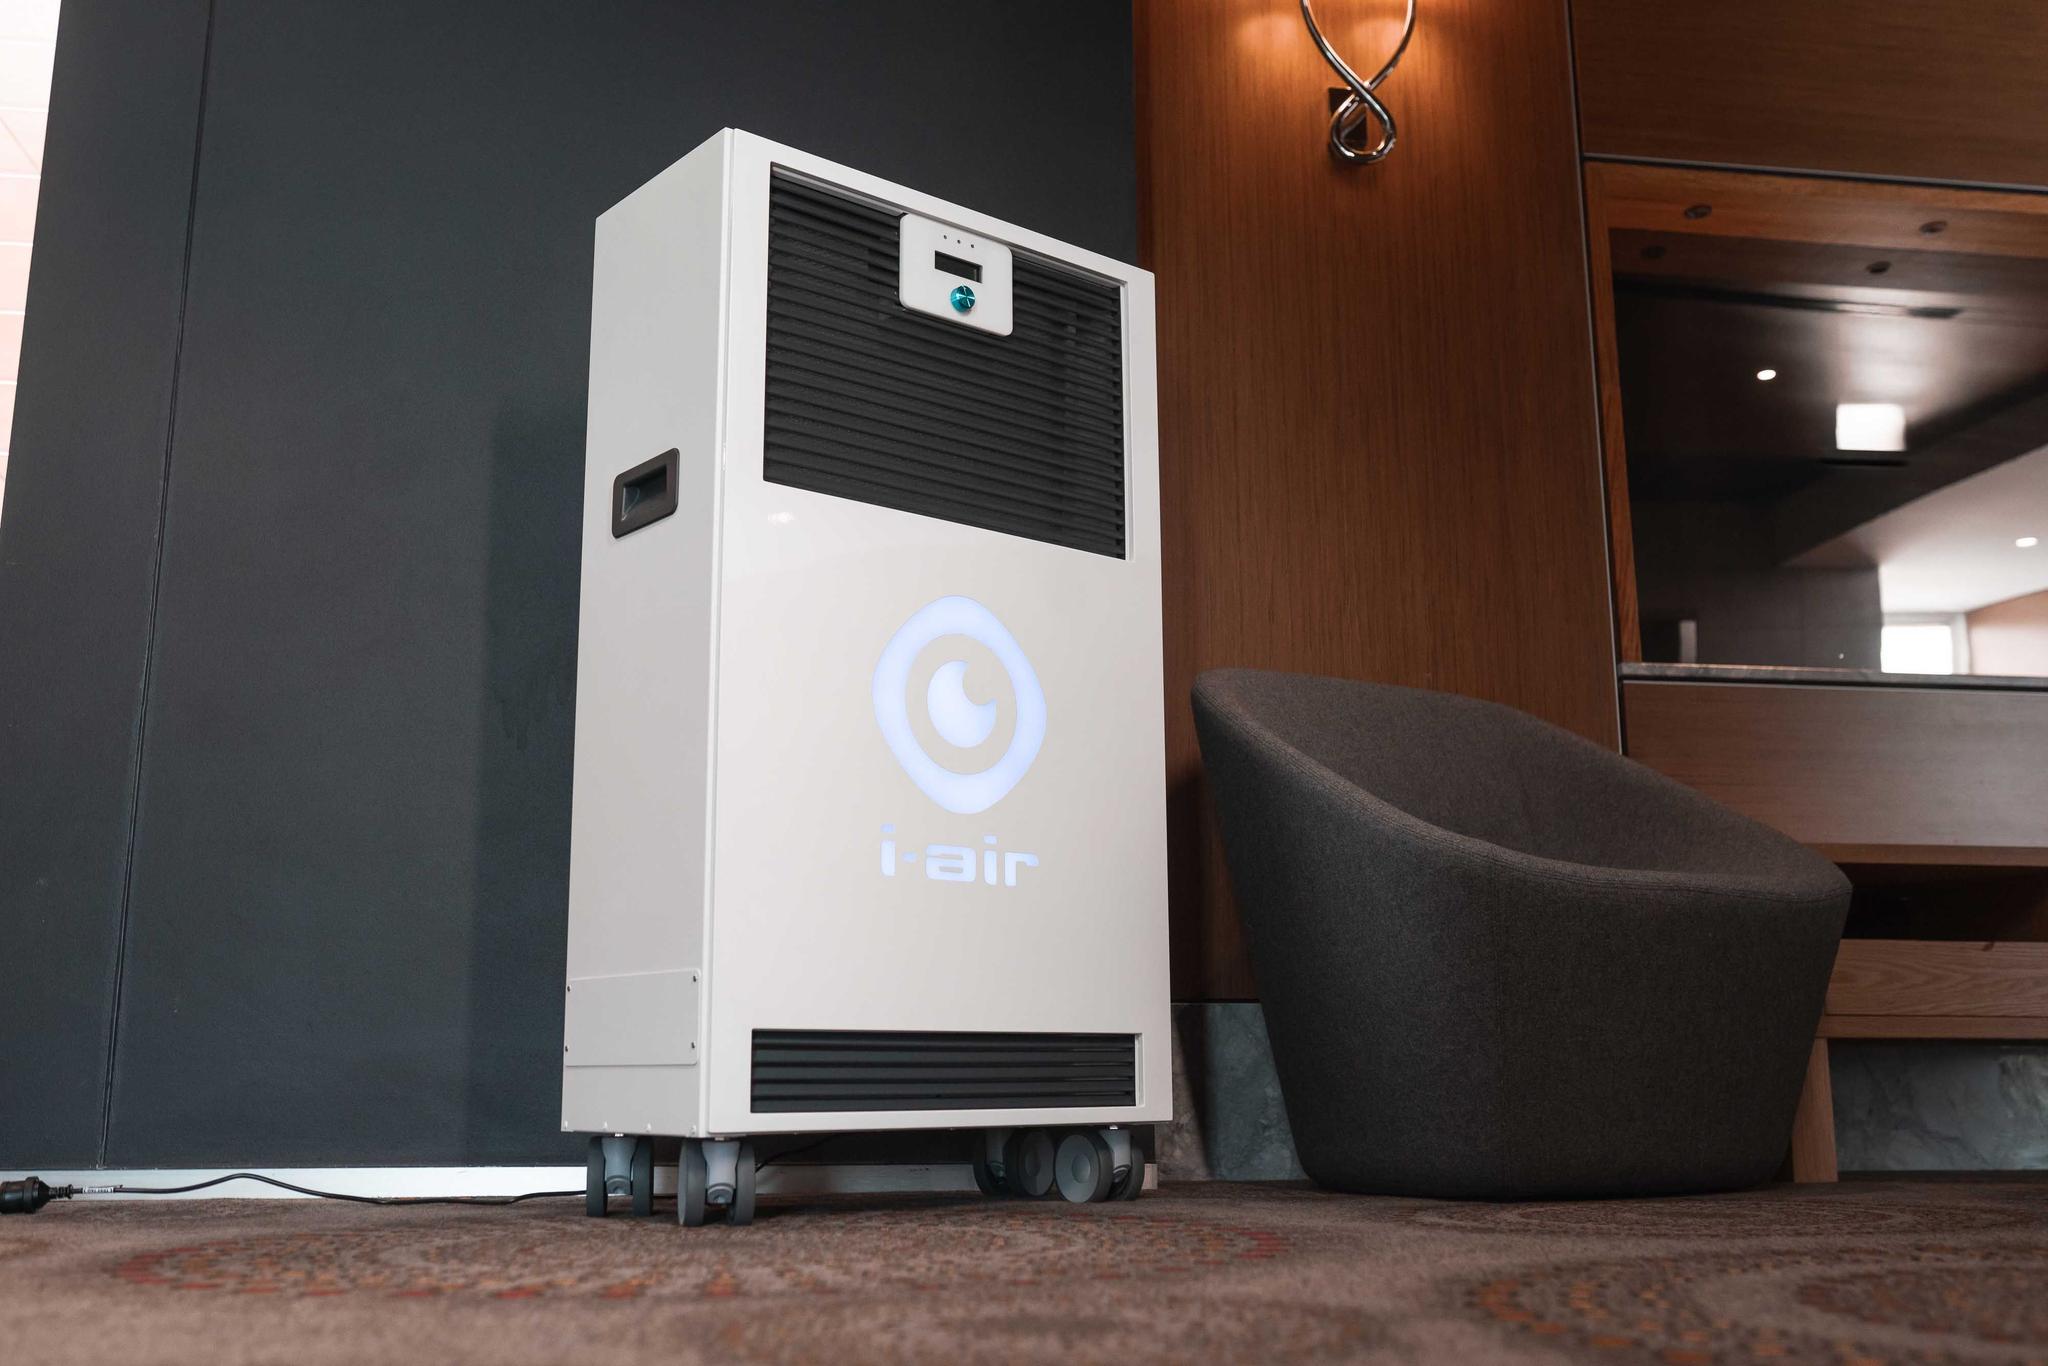 How Much Does an Air Purifier Cost?